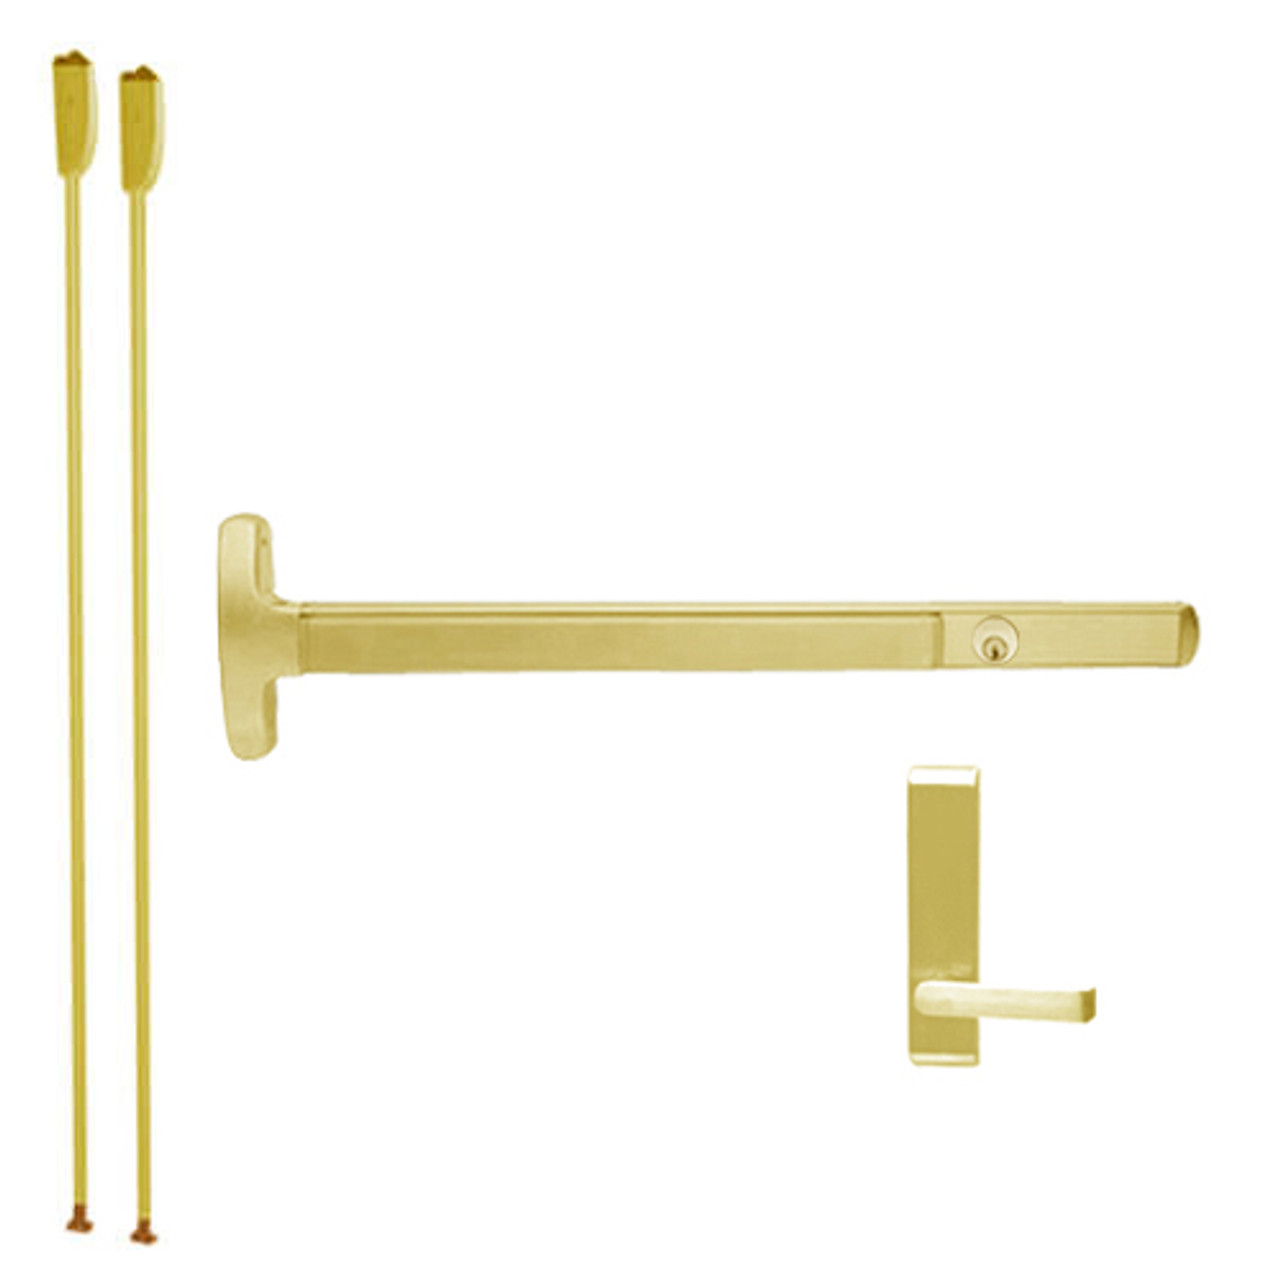 CD24-V-L-DT-Dane-US3-4-LHR Falcon Exit Device in Polished Brass